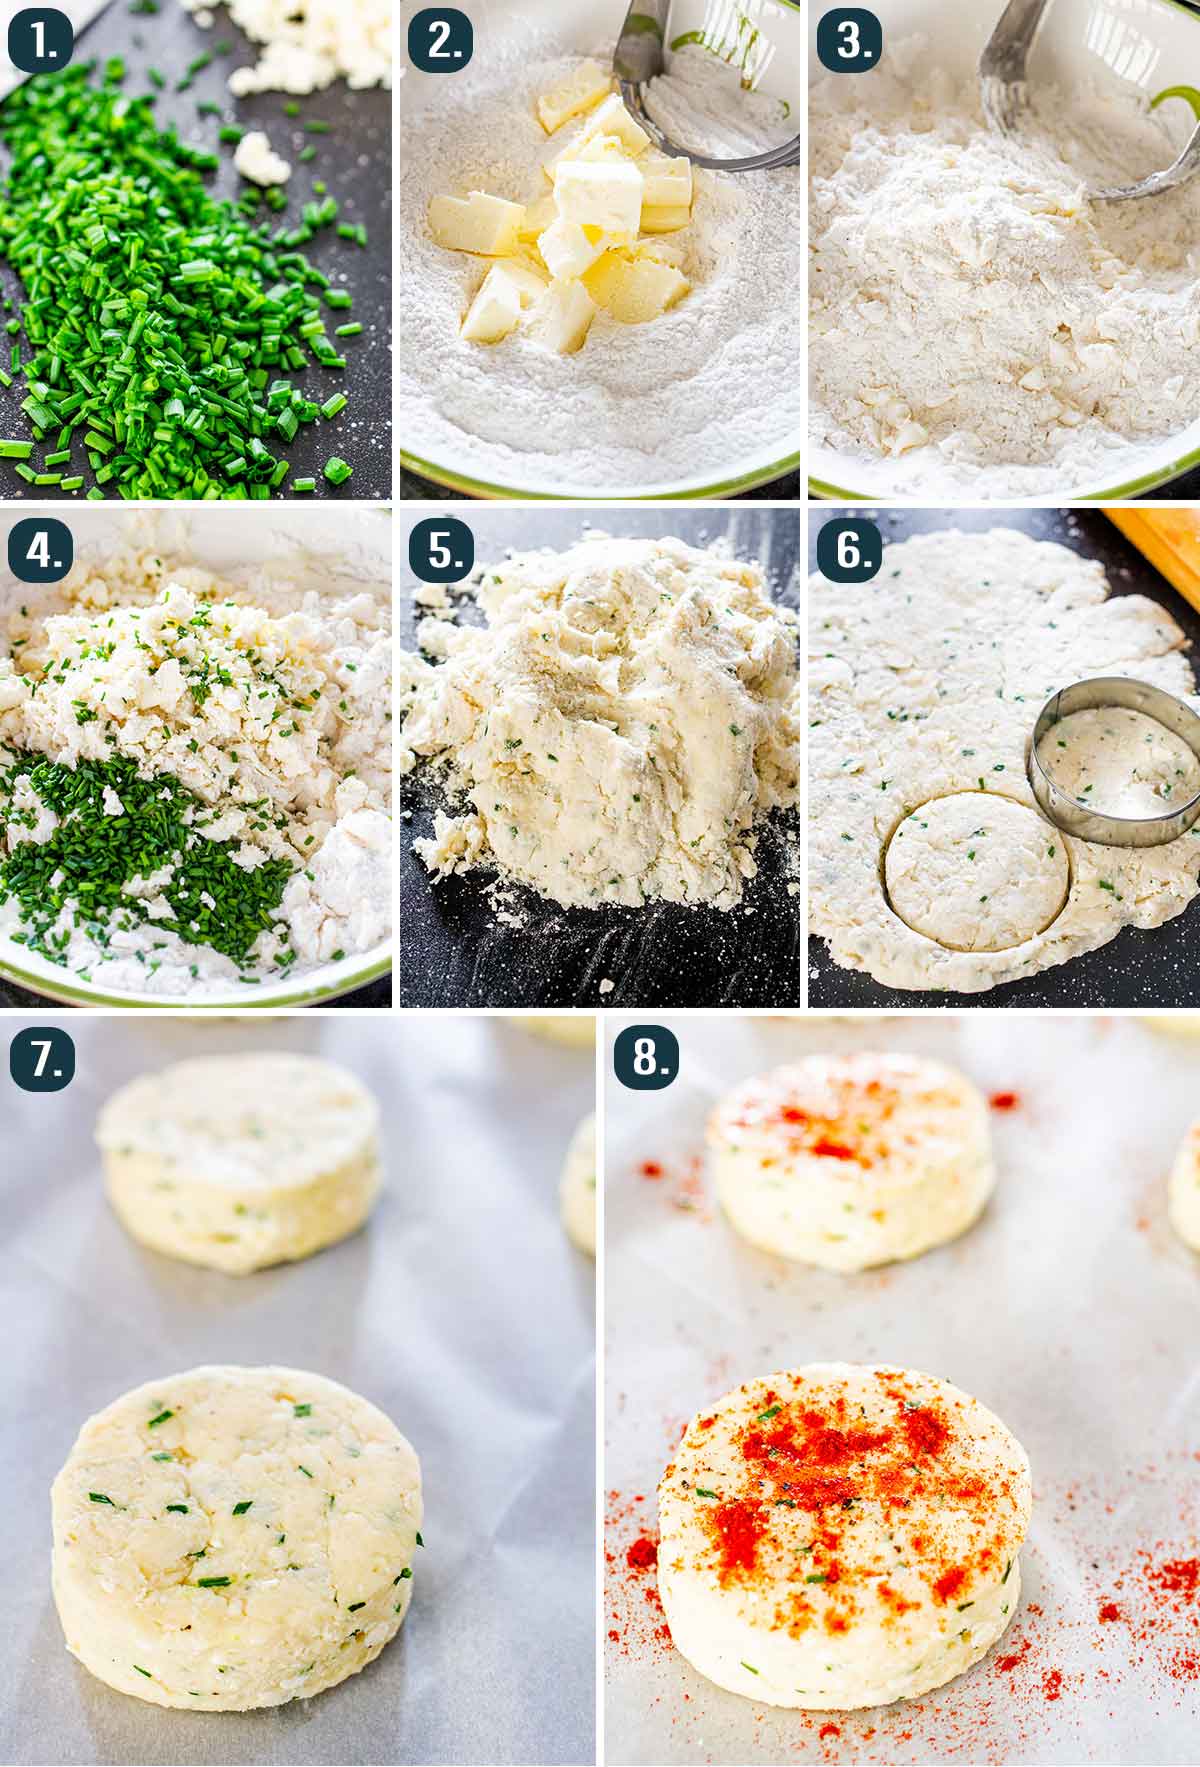 process shots showing how to make feta cheese biscuits